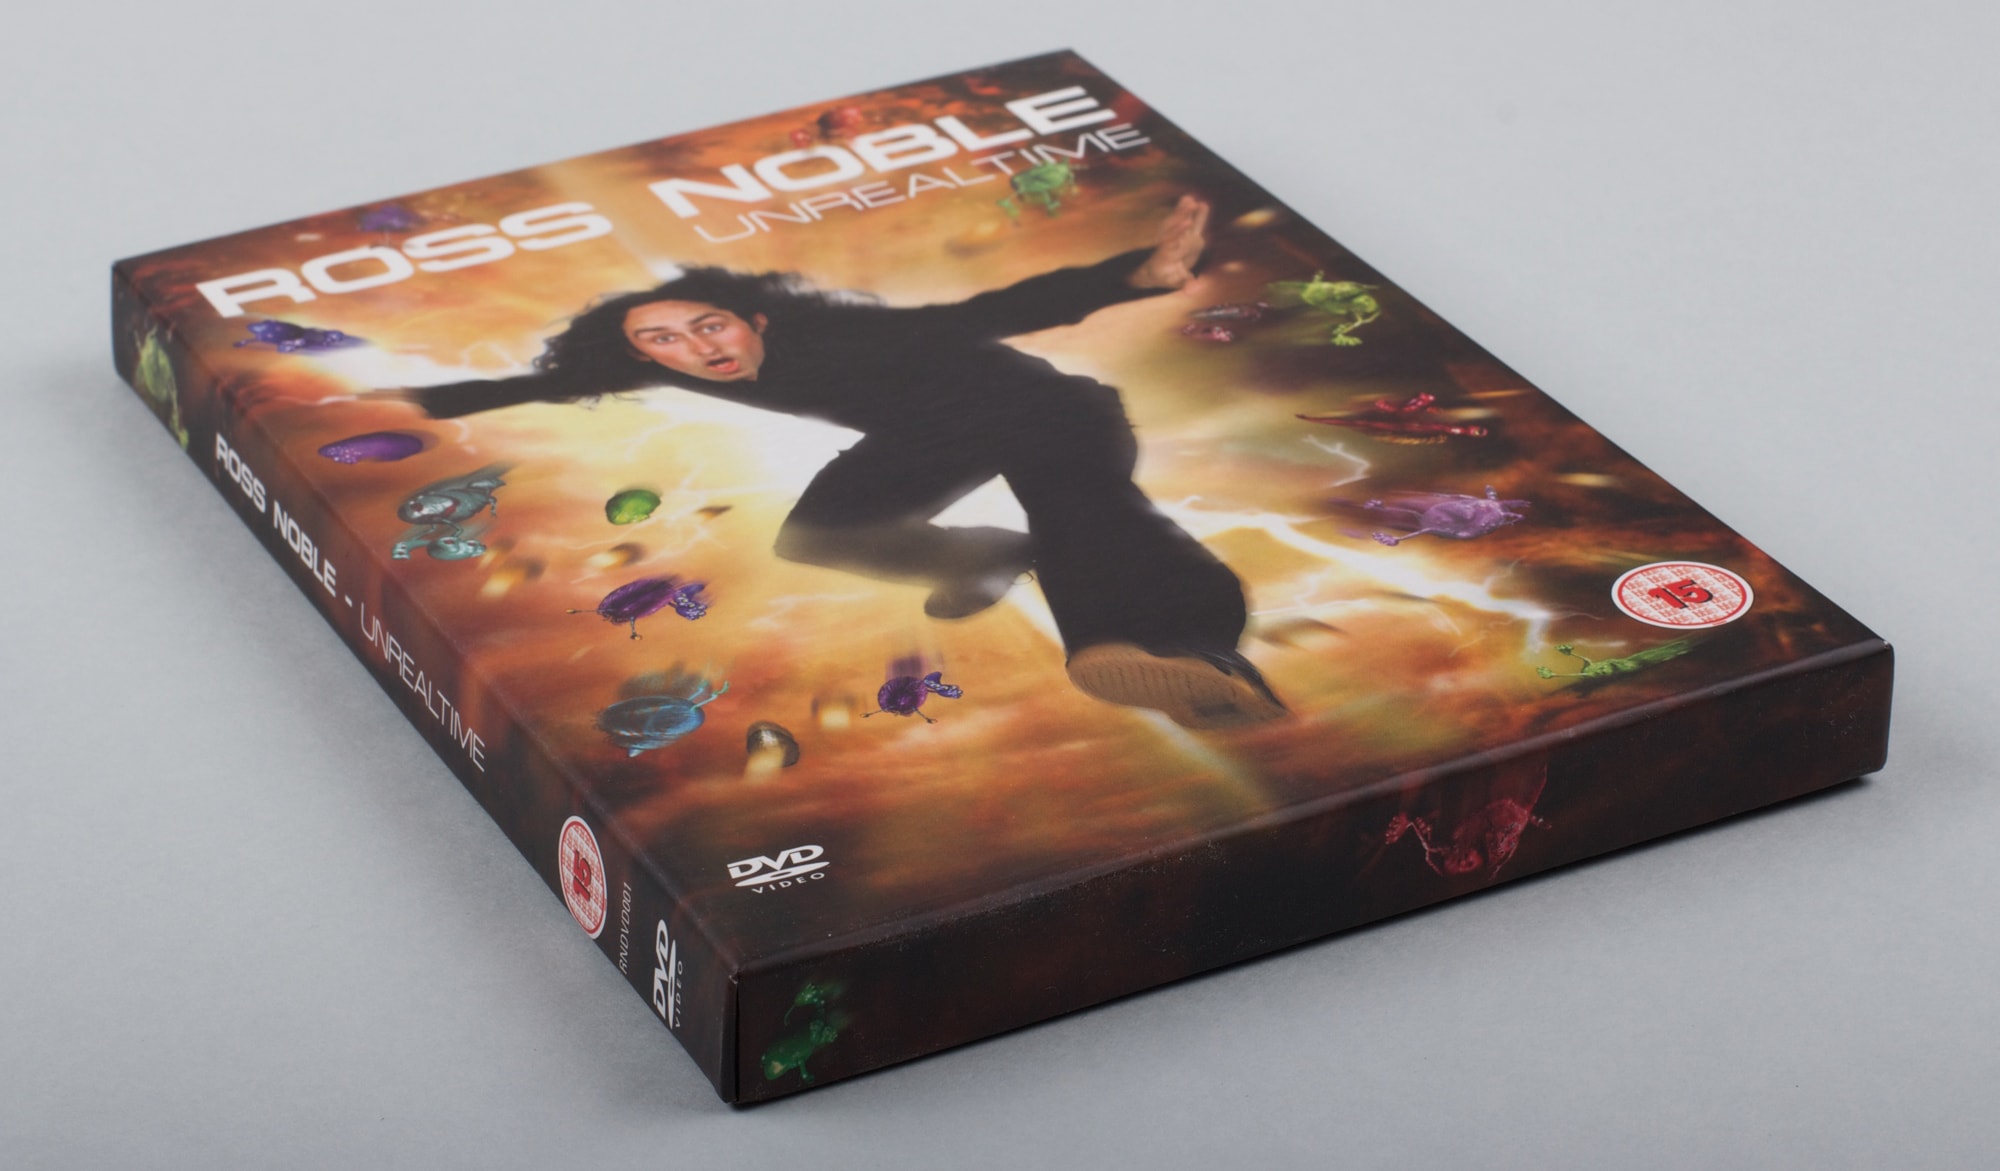 Ross Noble - Unrealtime DVD - packaging